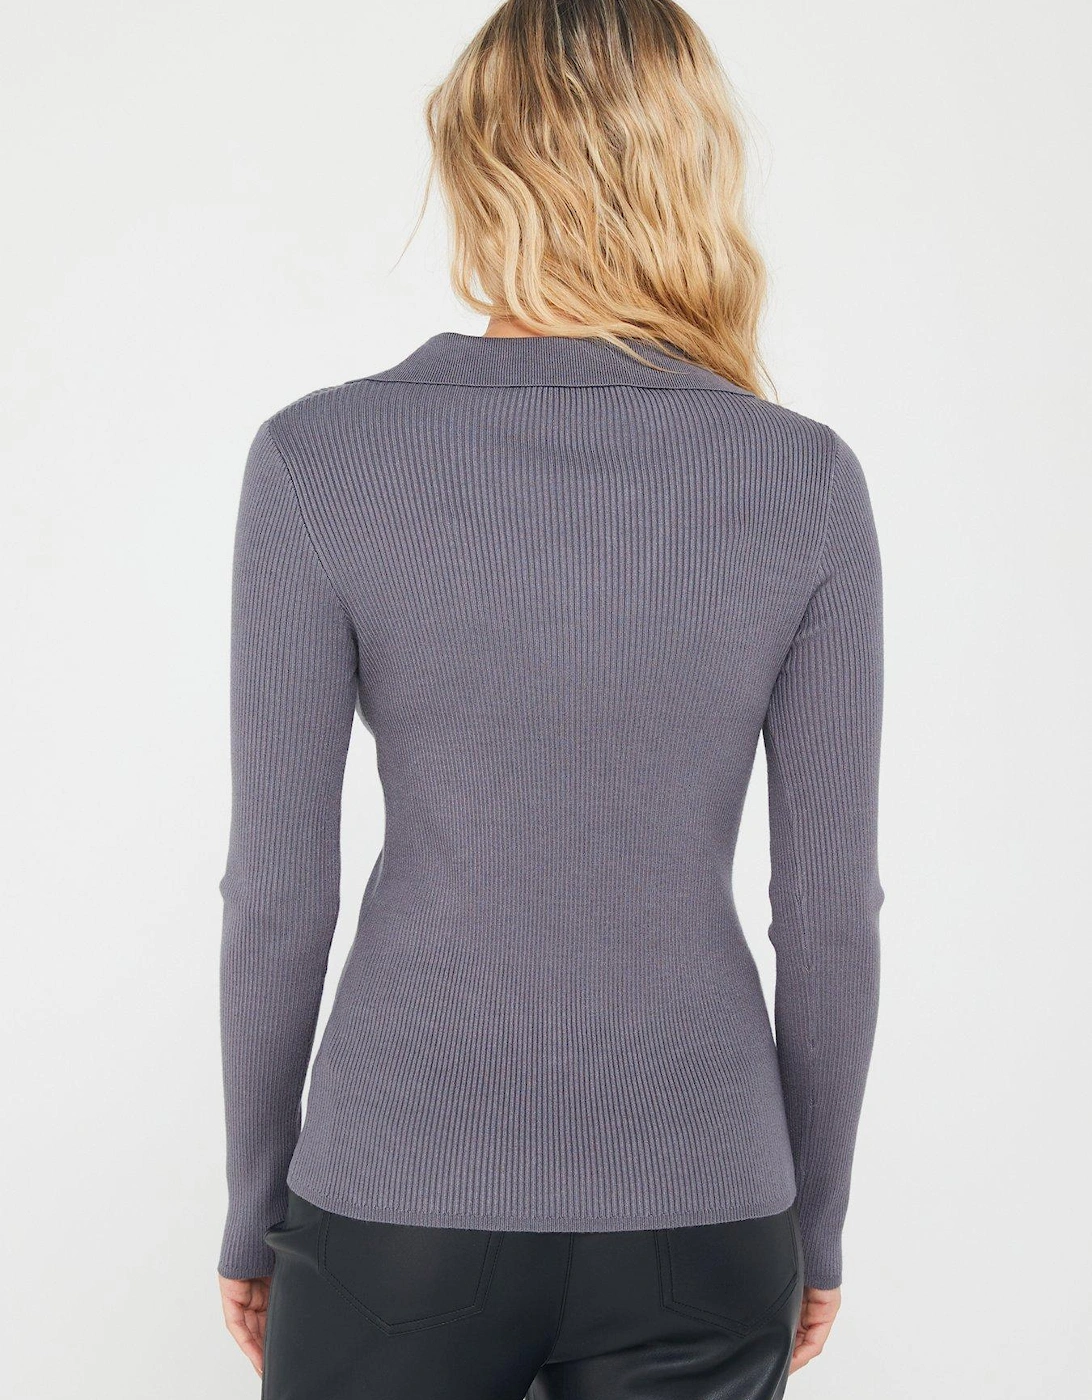 Collared Tie Neck Knitted Rib Jumper - Grey